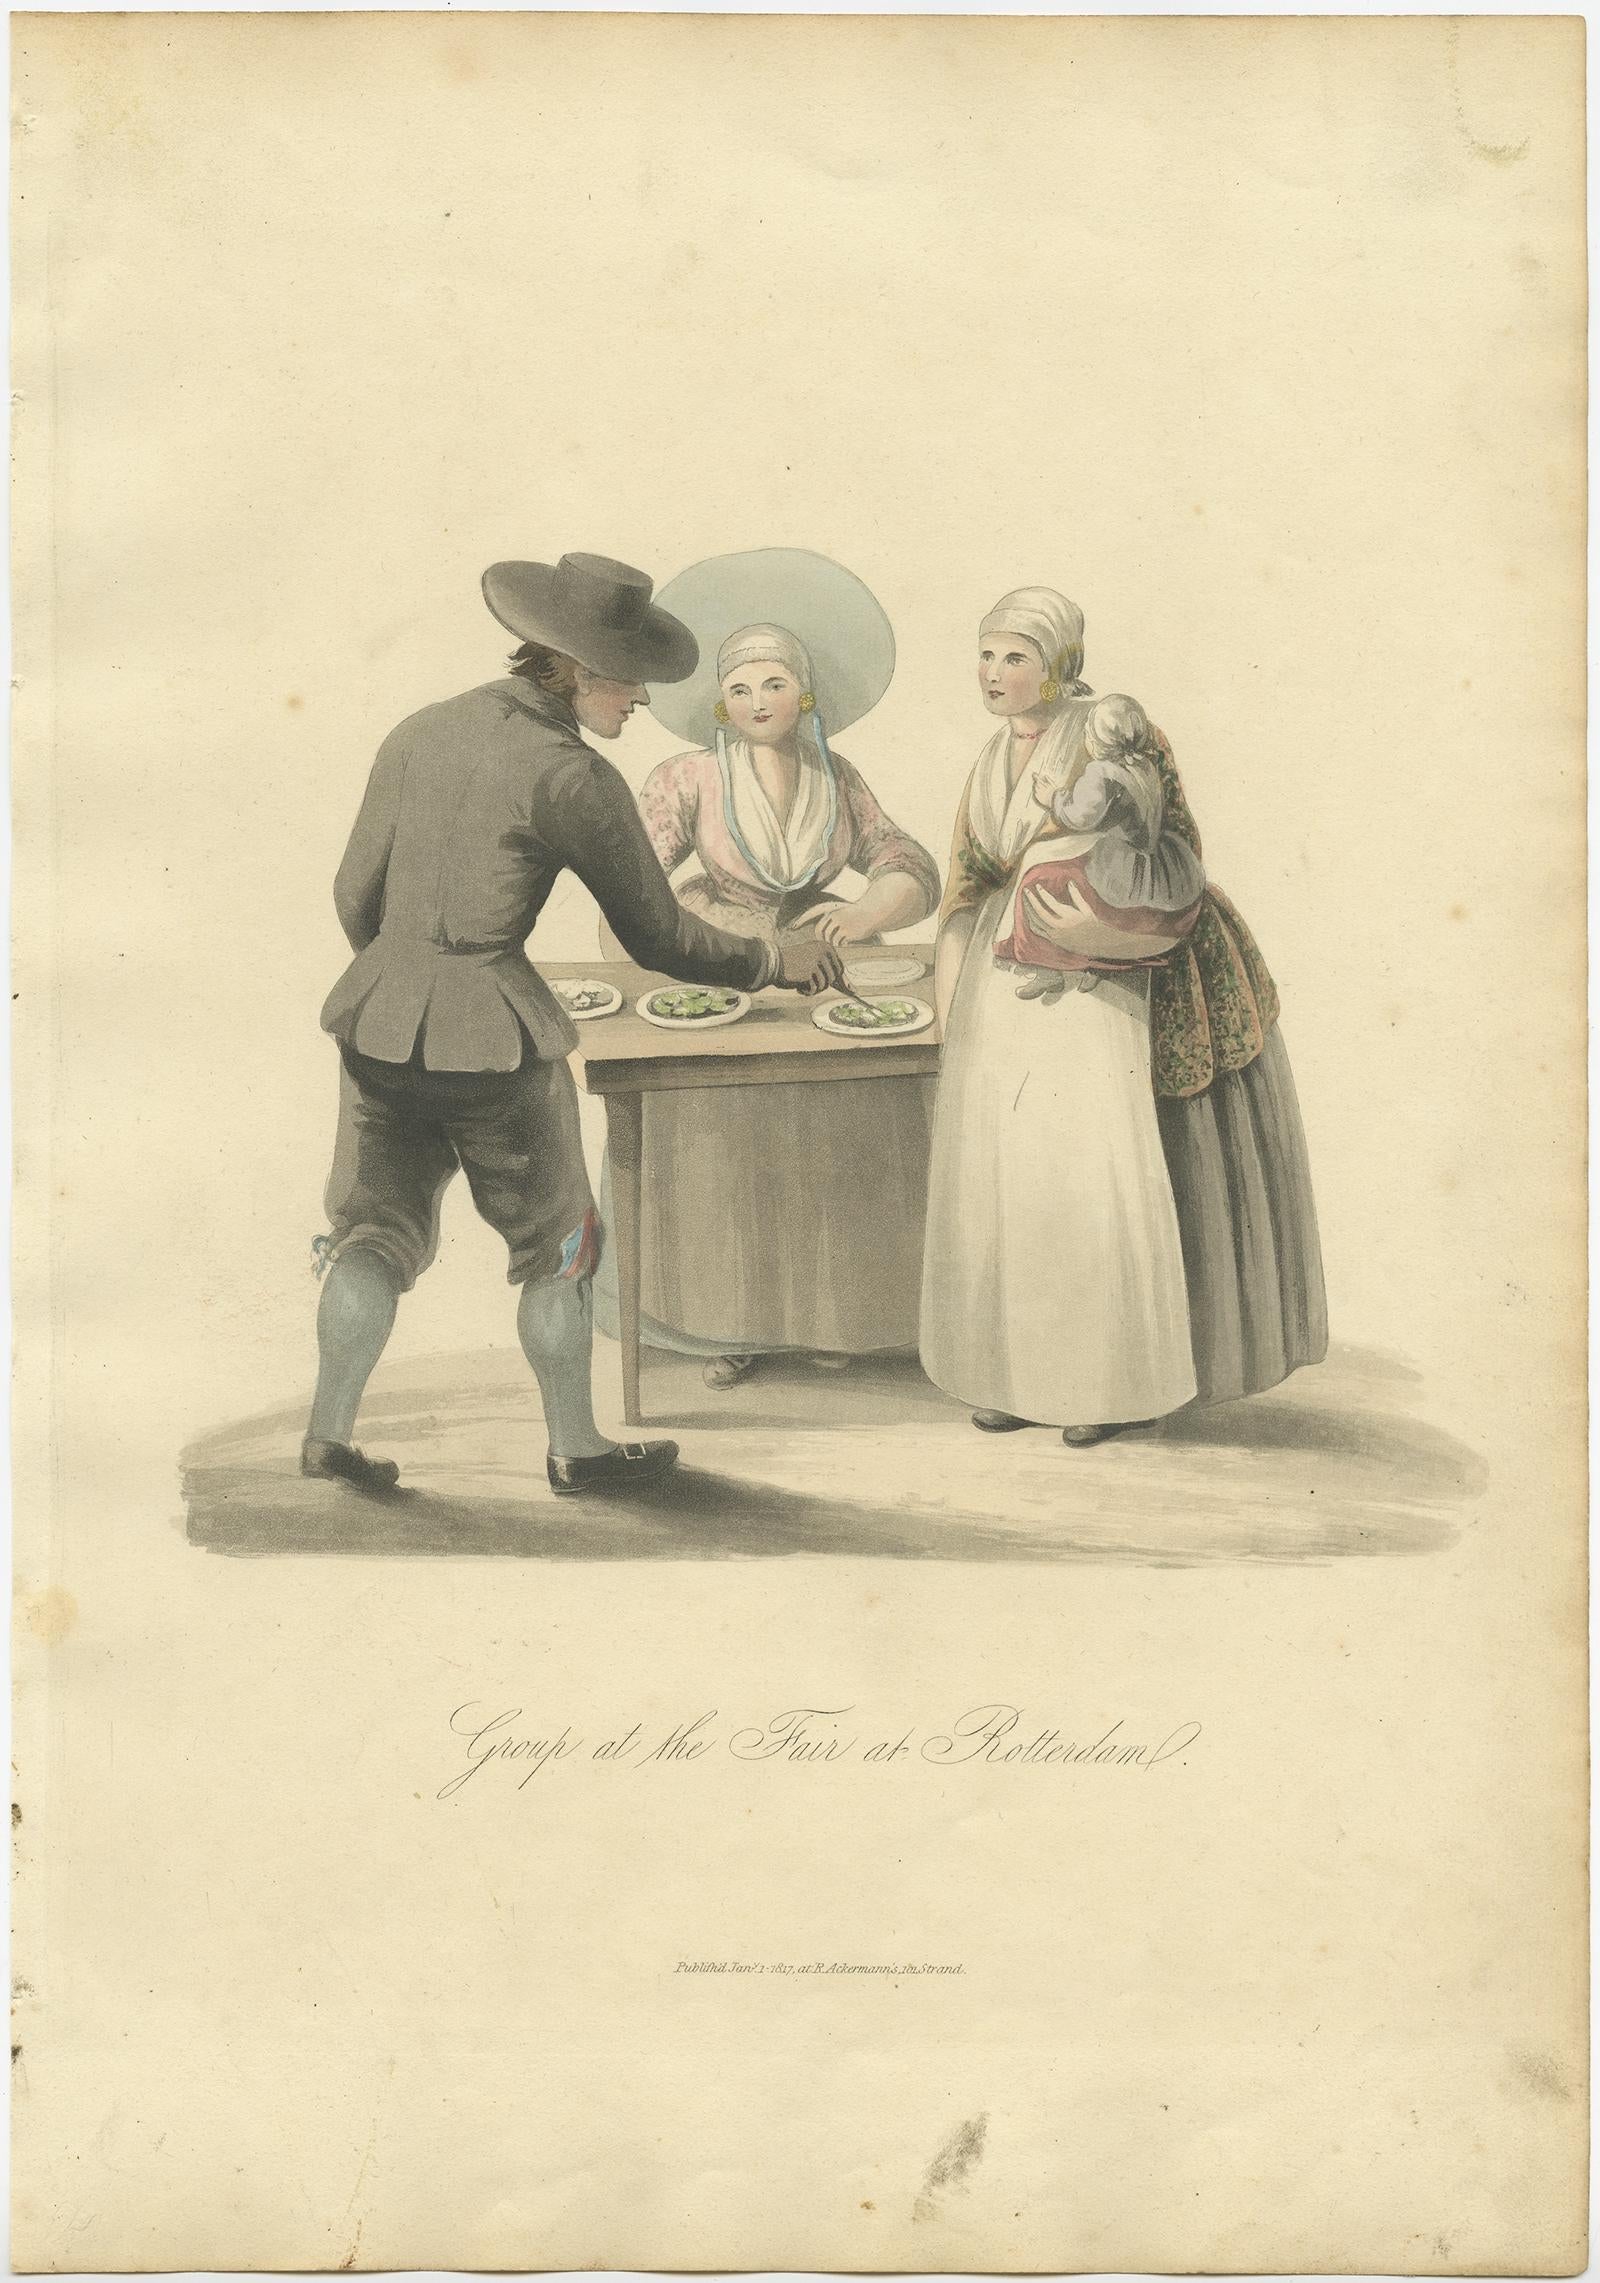 Antique costume print titled 'Group at the Fair at Rotterdam'. 

Old costume print depicting a group of people from Rotterdam. This print originates from 'The Costume of the Netherlands displayed in thirty coloured engravings'. 

Artists and